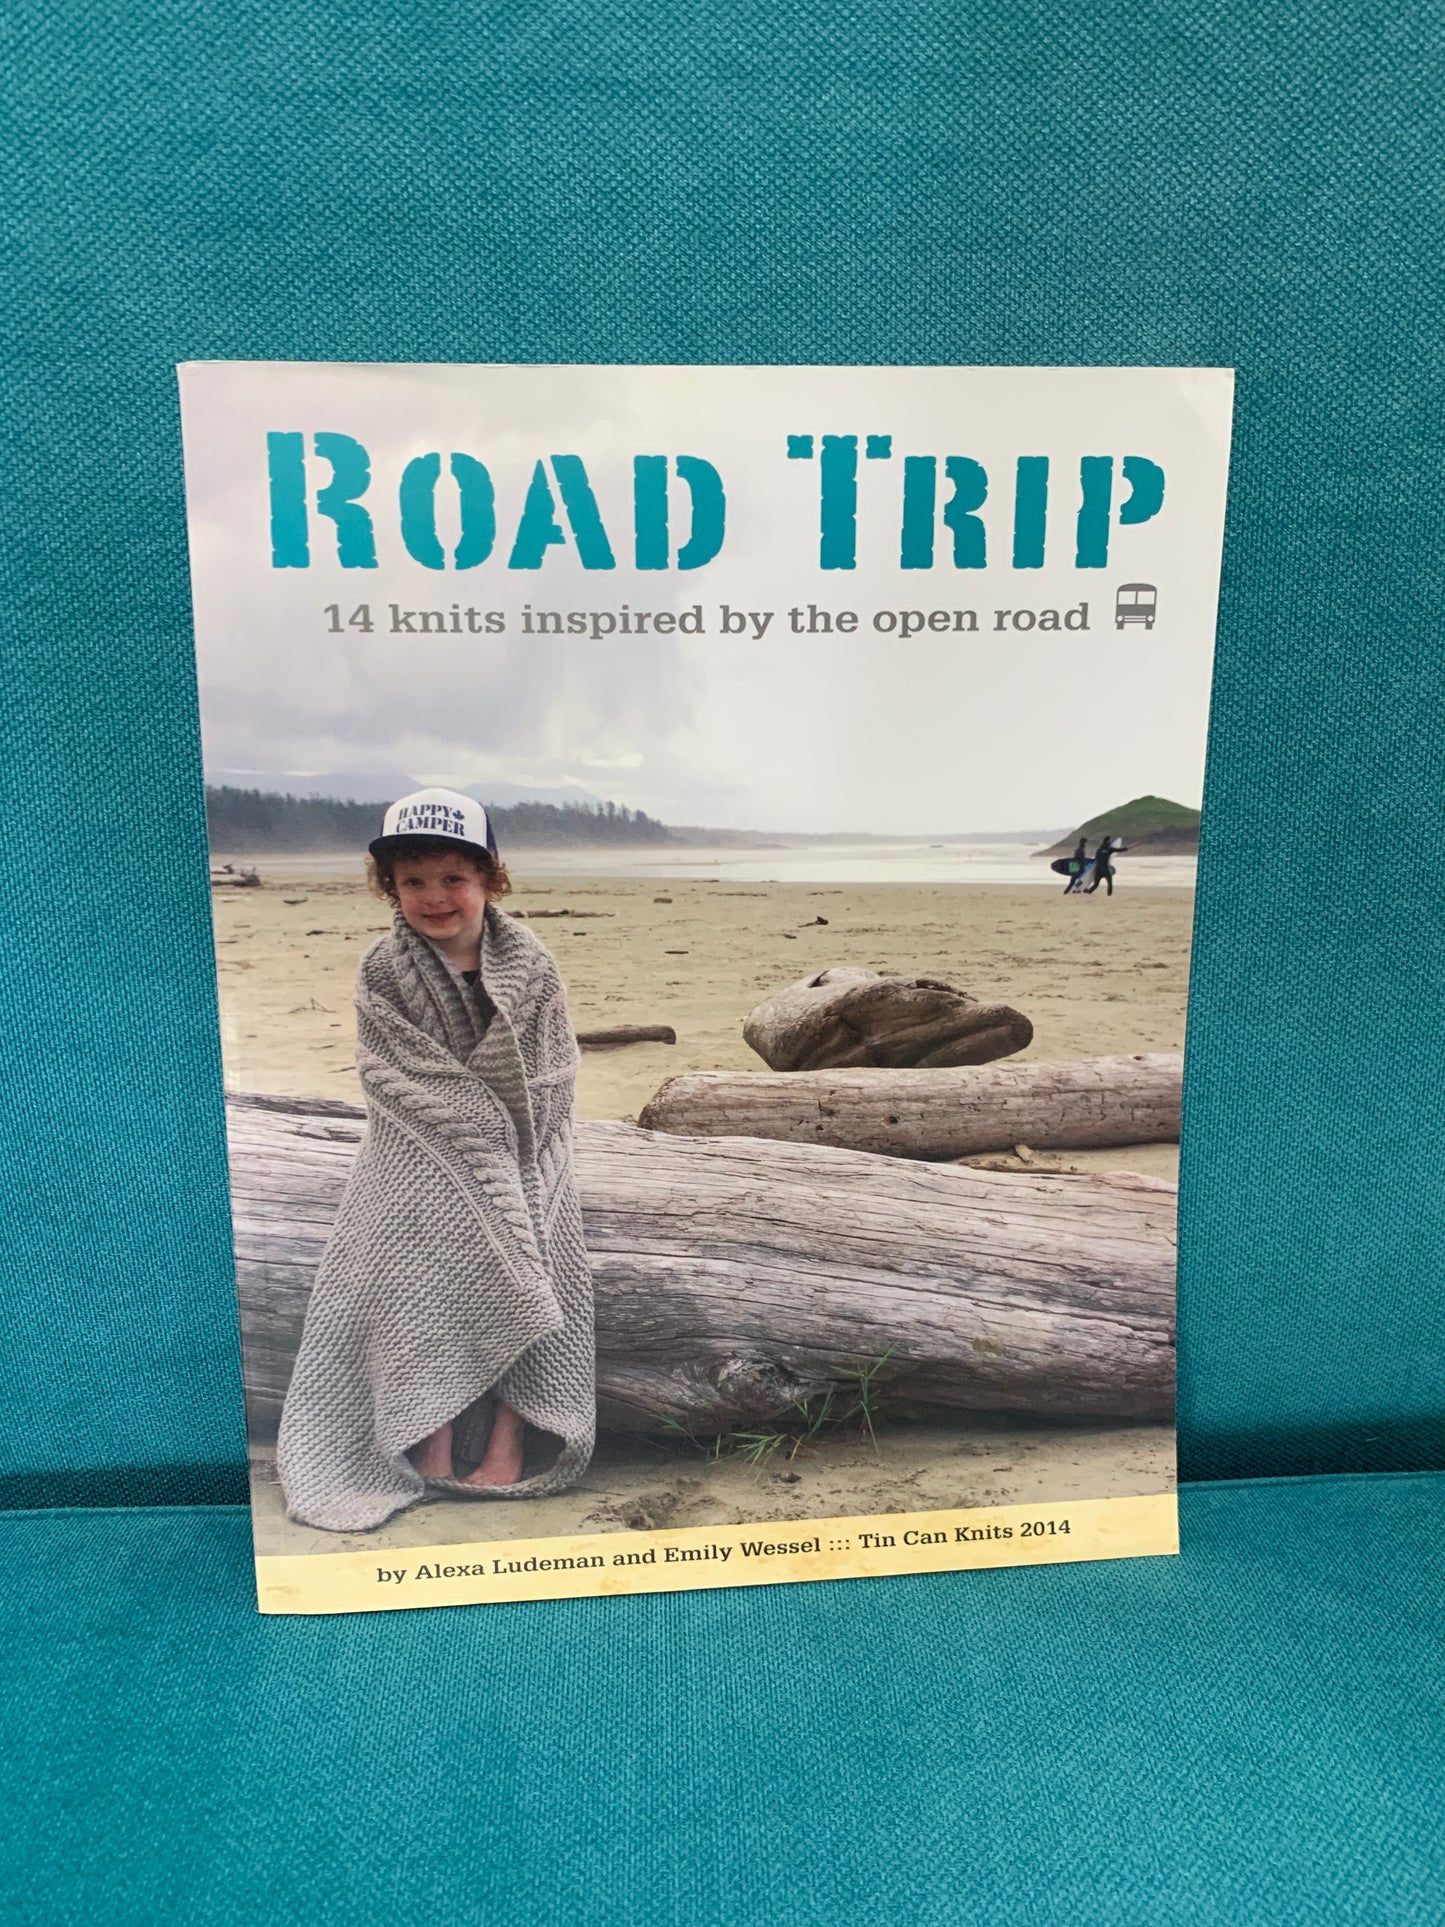 Road Trip: 14 Knits Inspired by the Open Road - Alexa Ludeman and Emily Wessel (Tin Can Knits 2014)